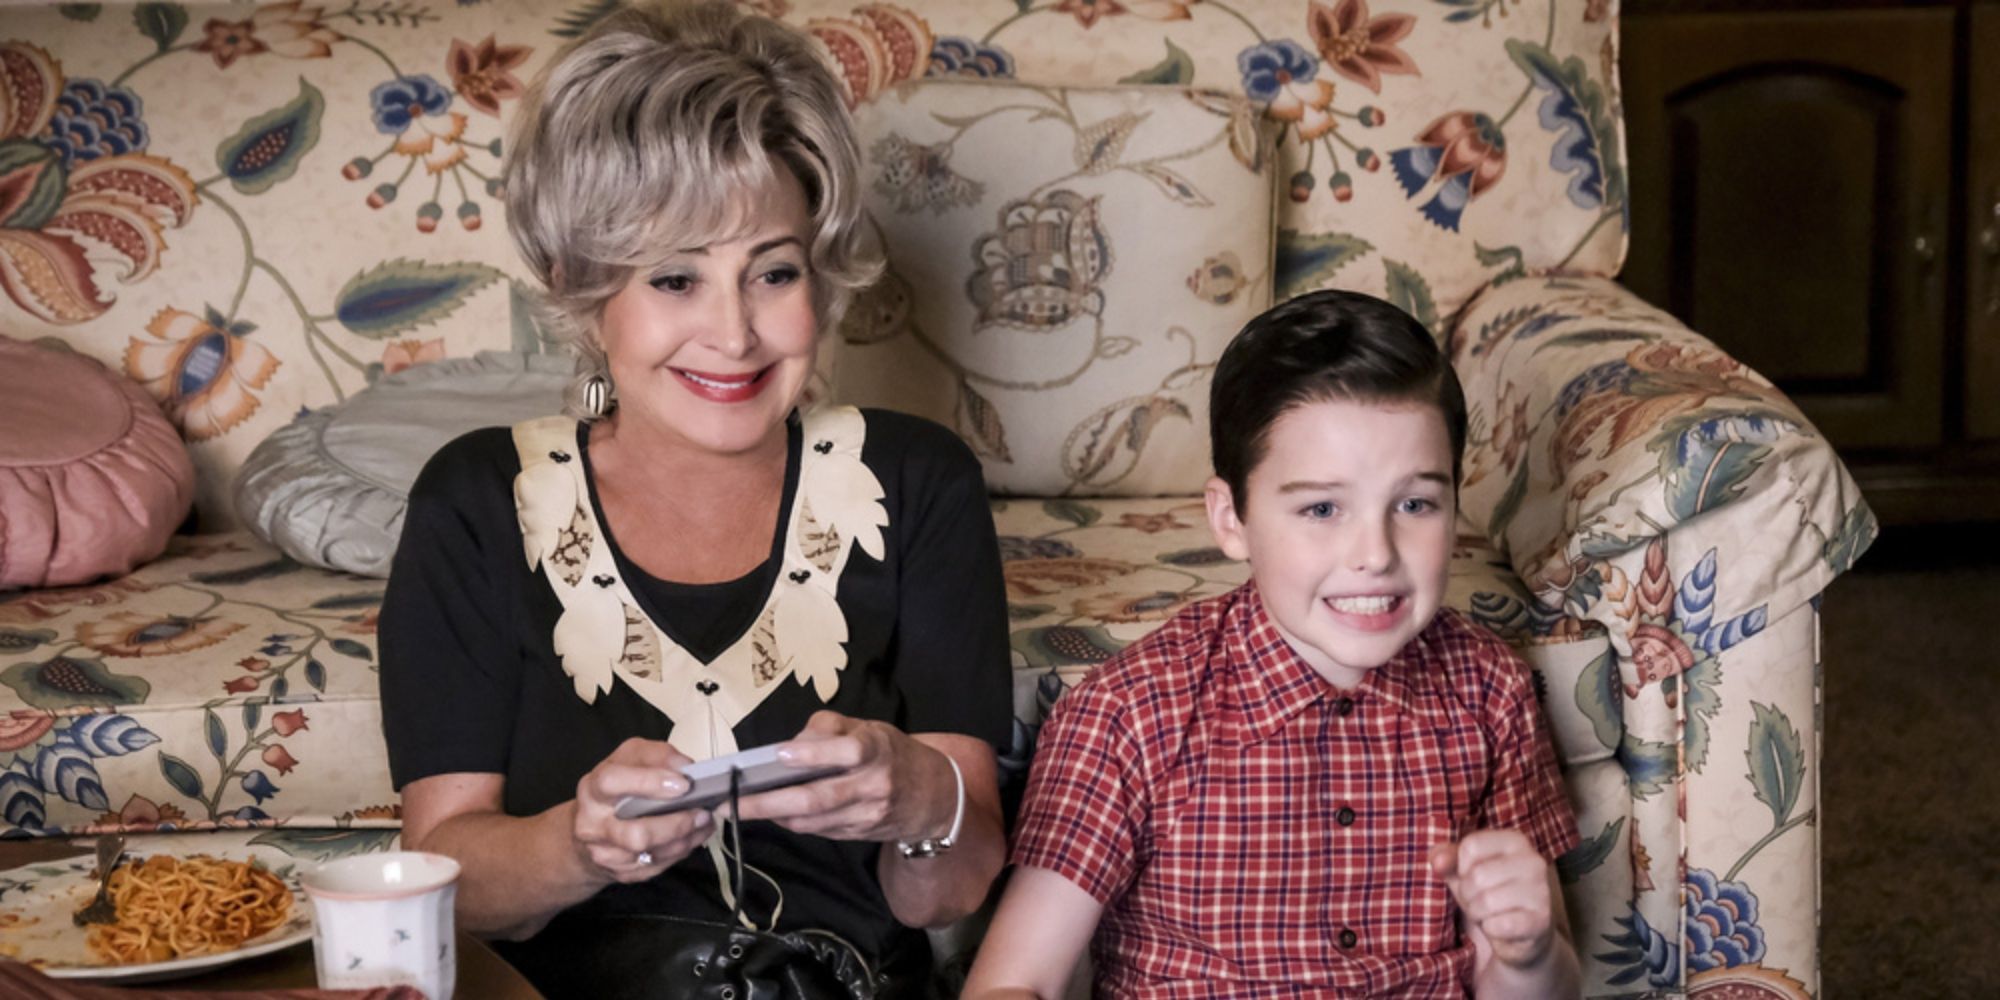 Sheldon Cooper, played by Iain Armitage, watches his Meemaw, played by Annie Potts, try out his favorite video game.